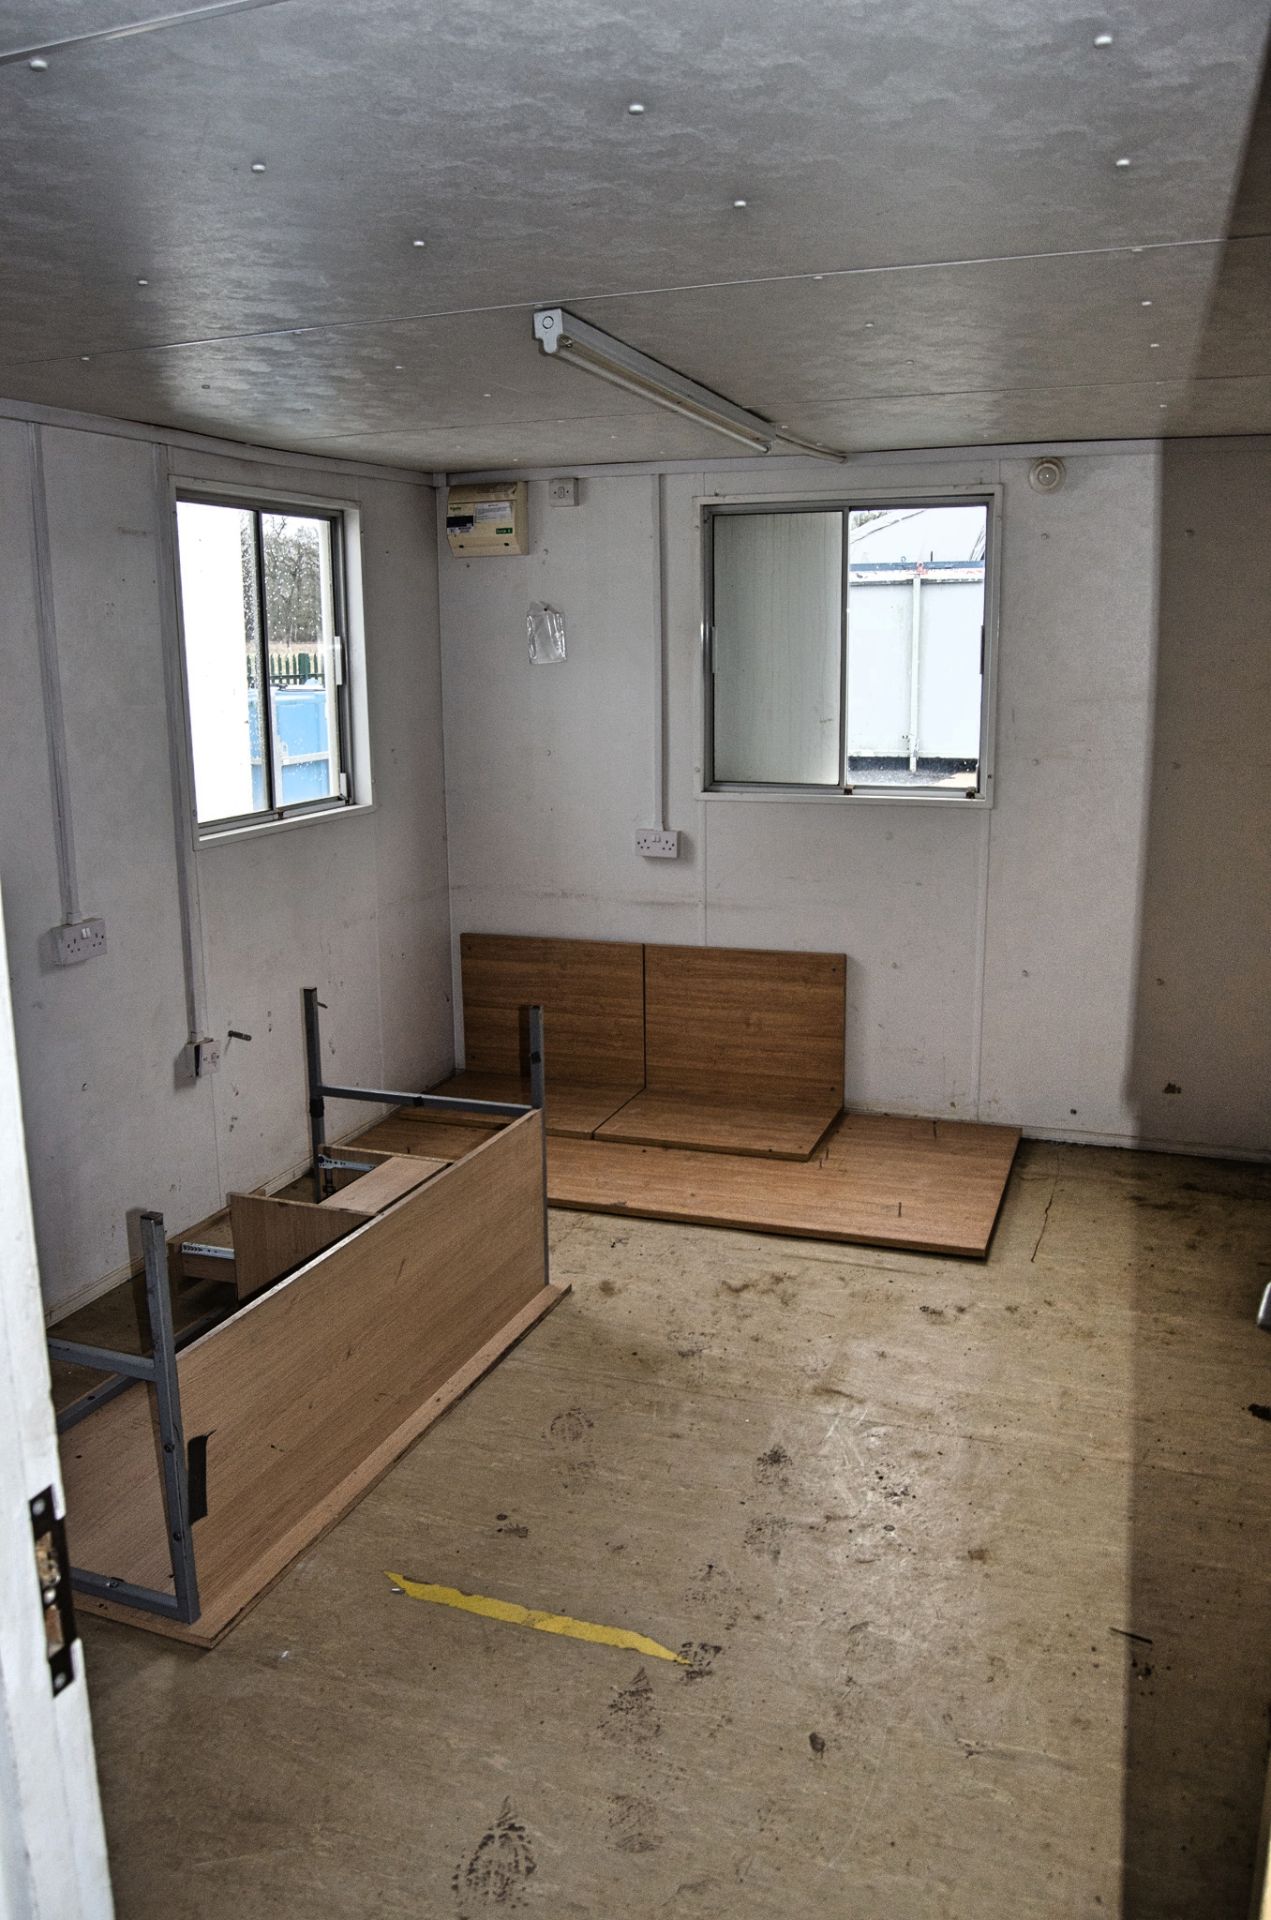 32ft x 10ft steel anti-vandal office site unit Comprising of: lobby area & 2 - offices A581030 ** No - Image 6 of 7